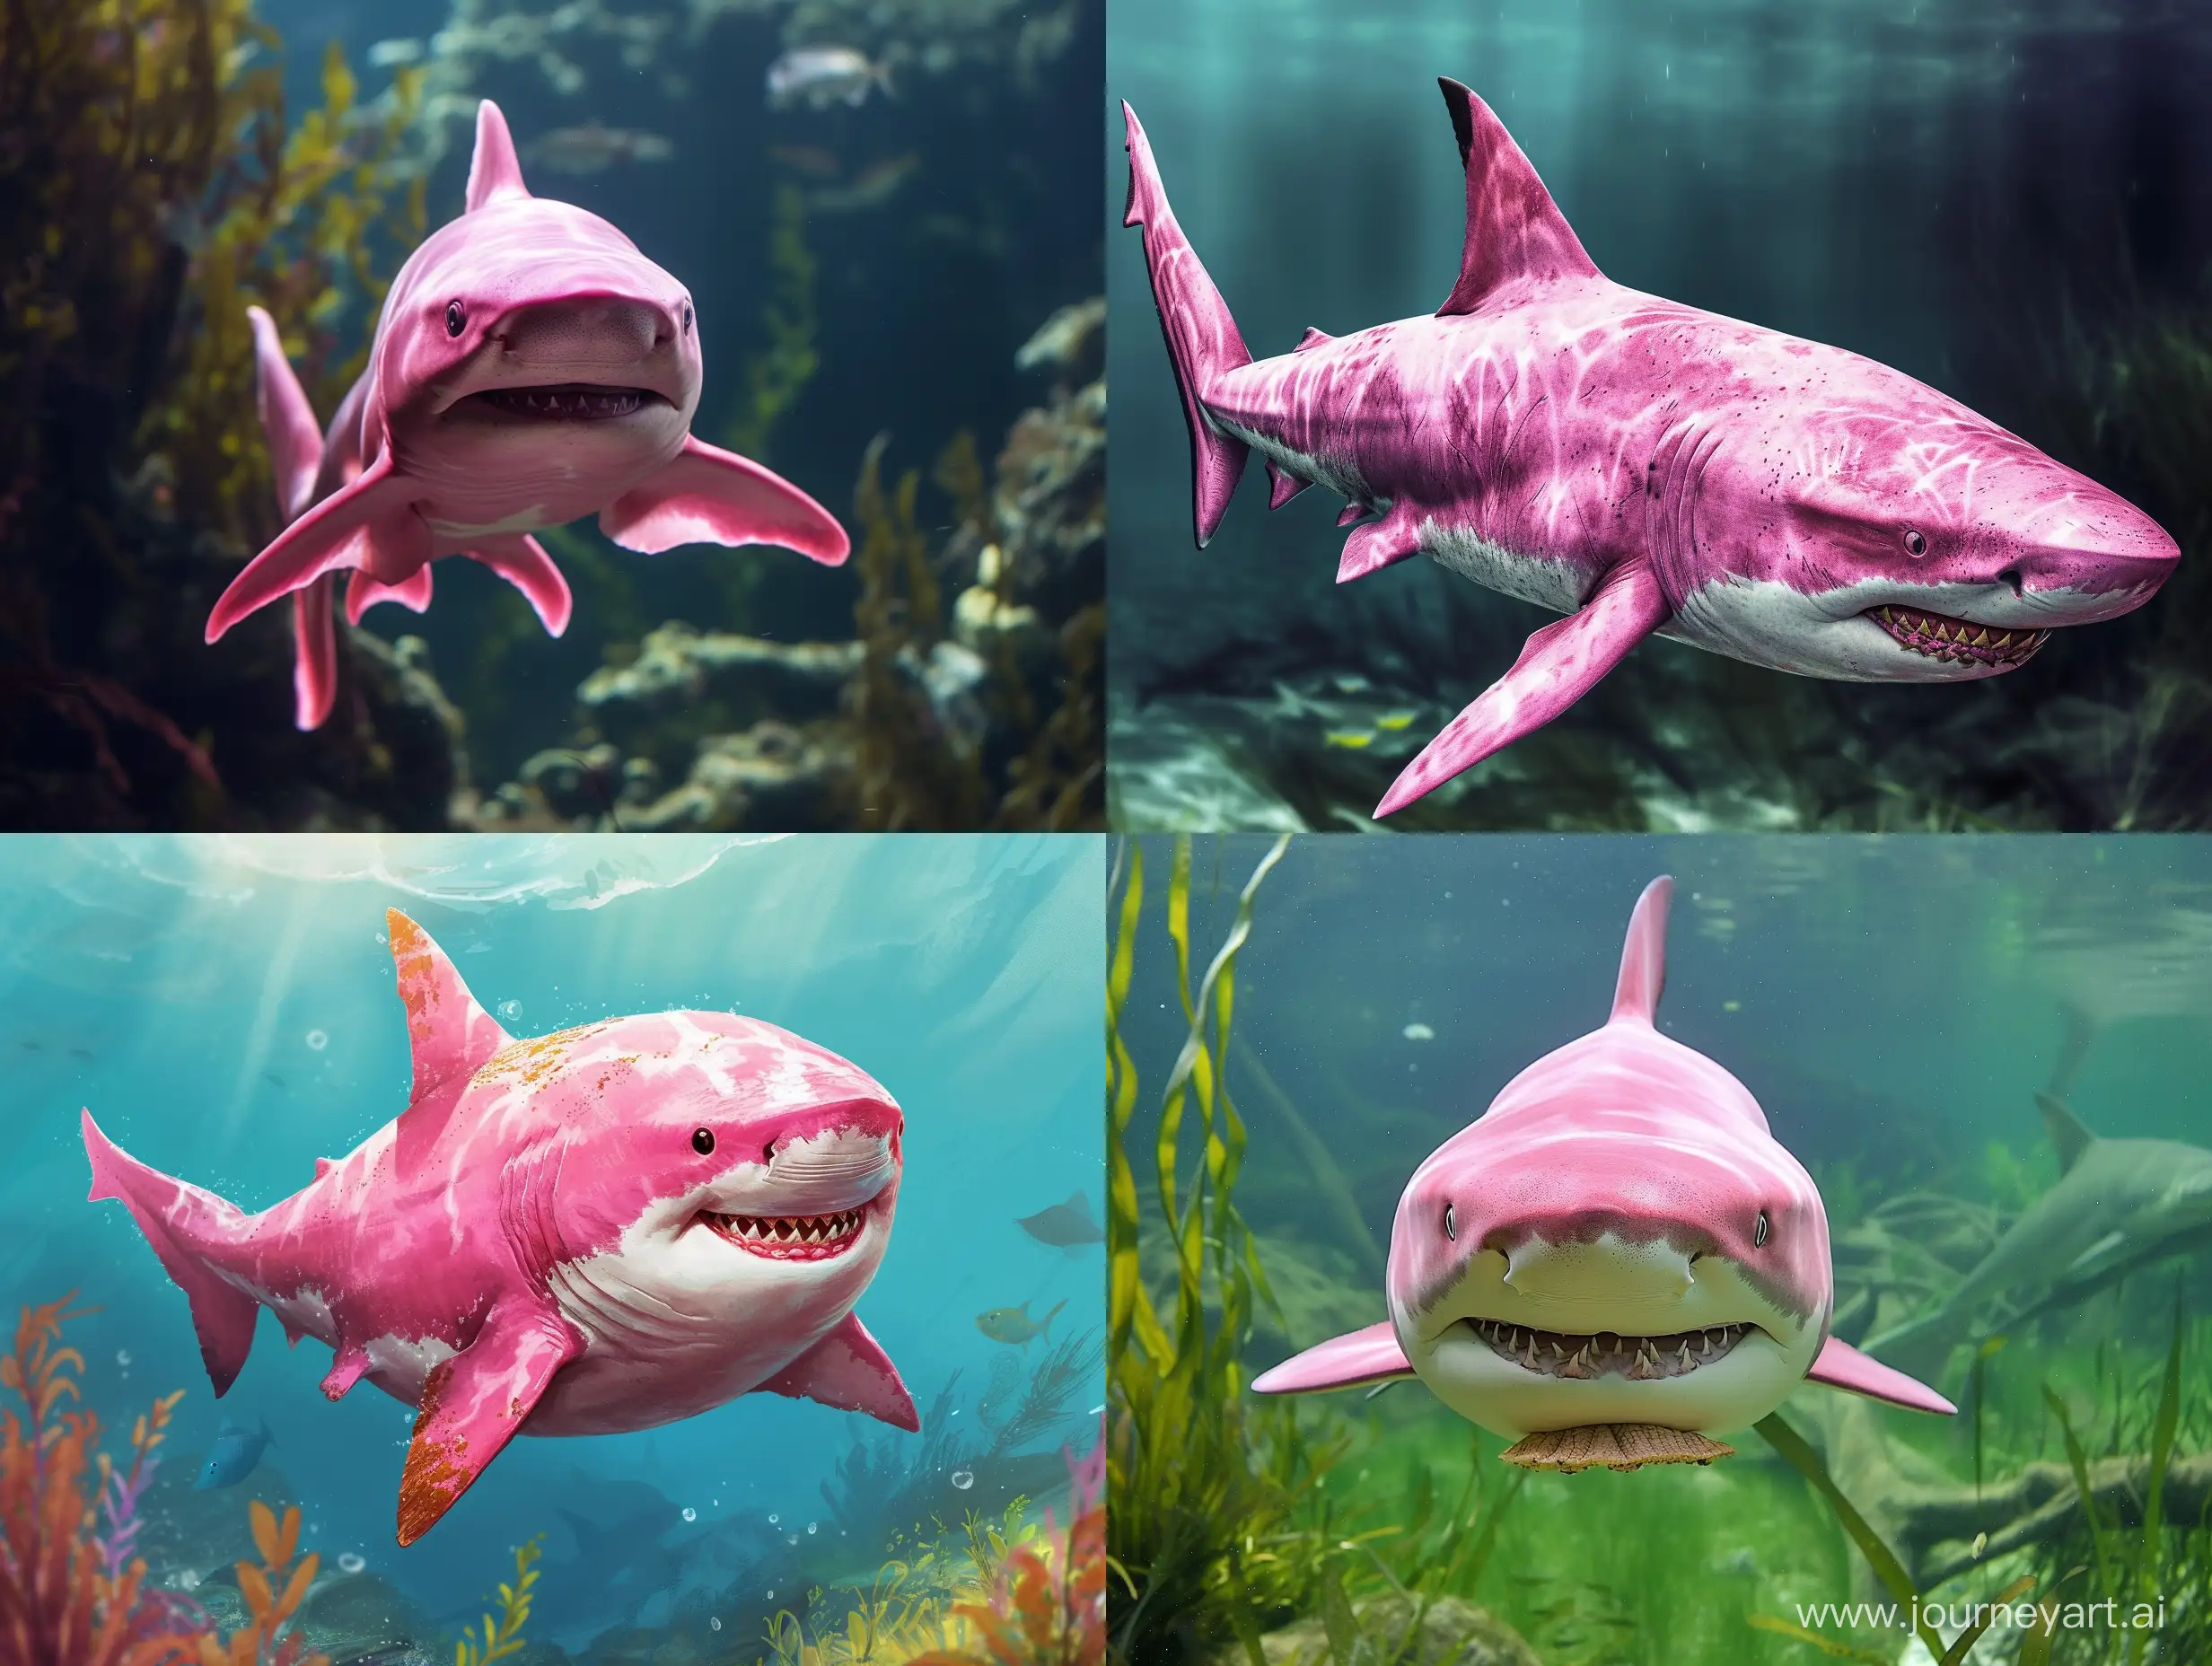 Playful-Pink-Shark-with-a-Unique-Trunk-in-a-43-Aspect-Ratio